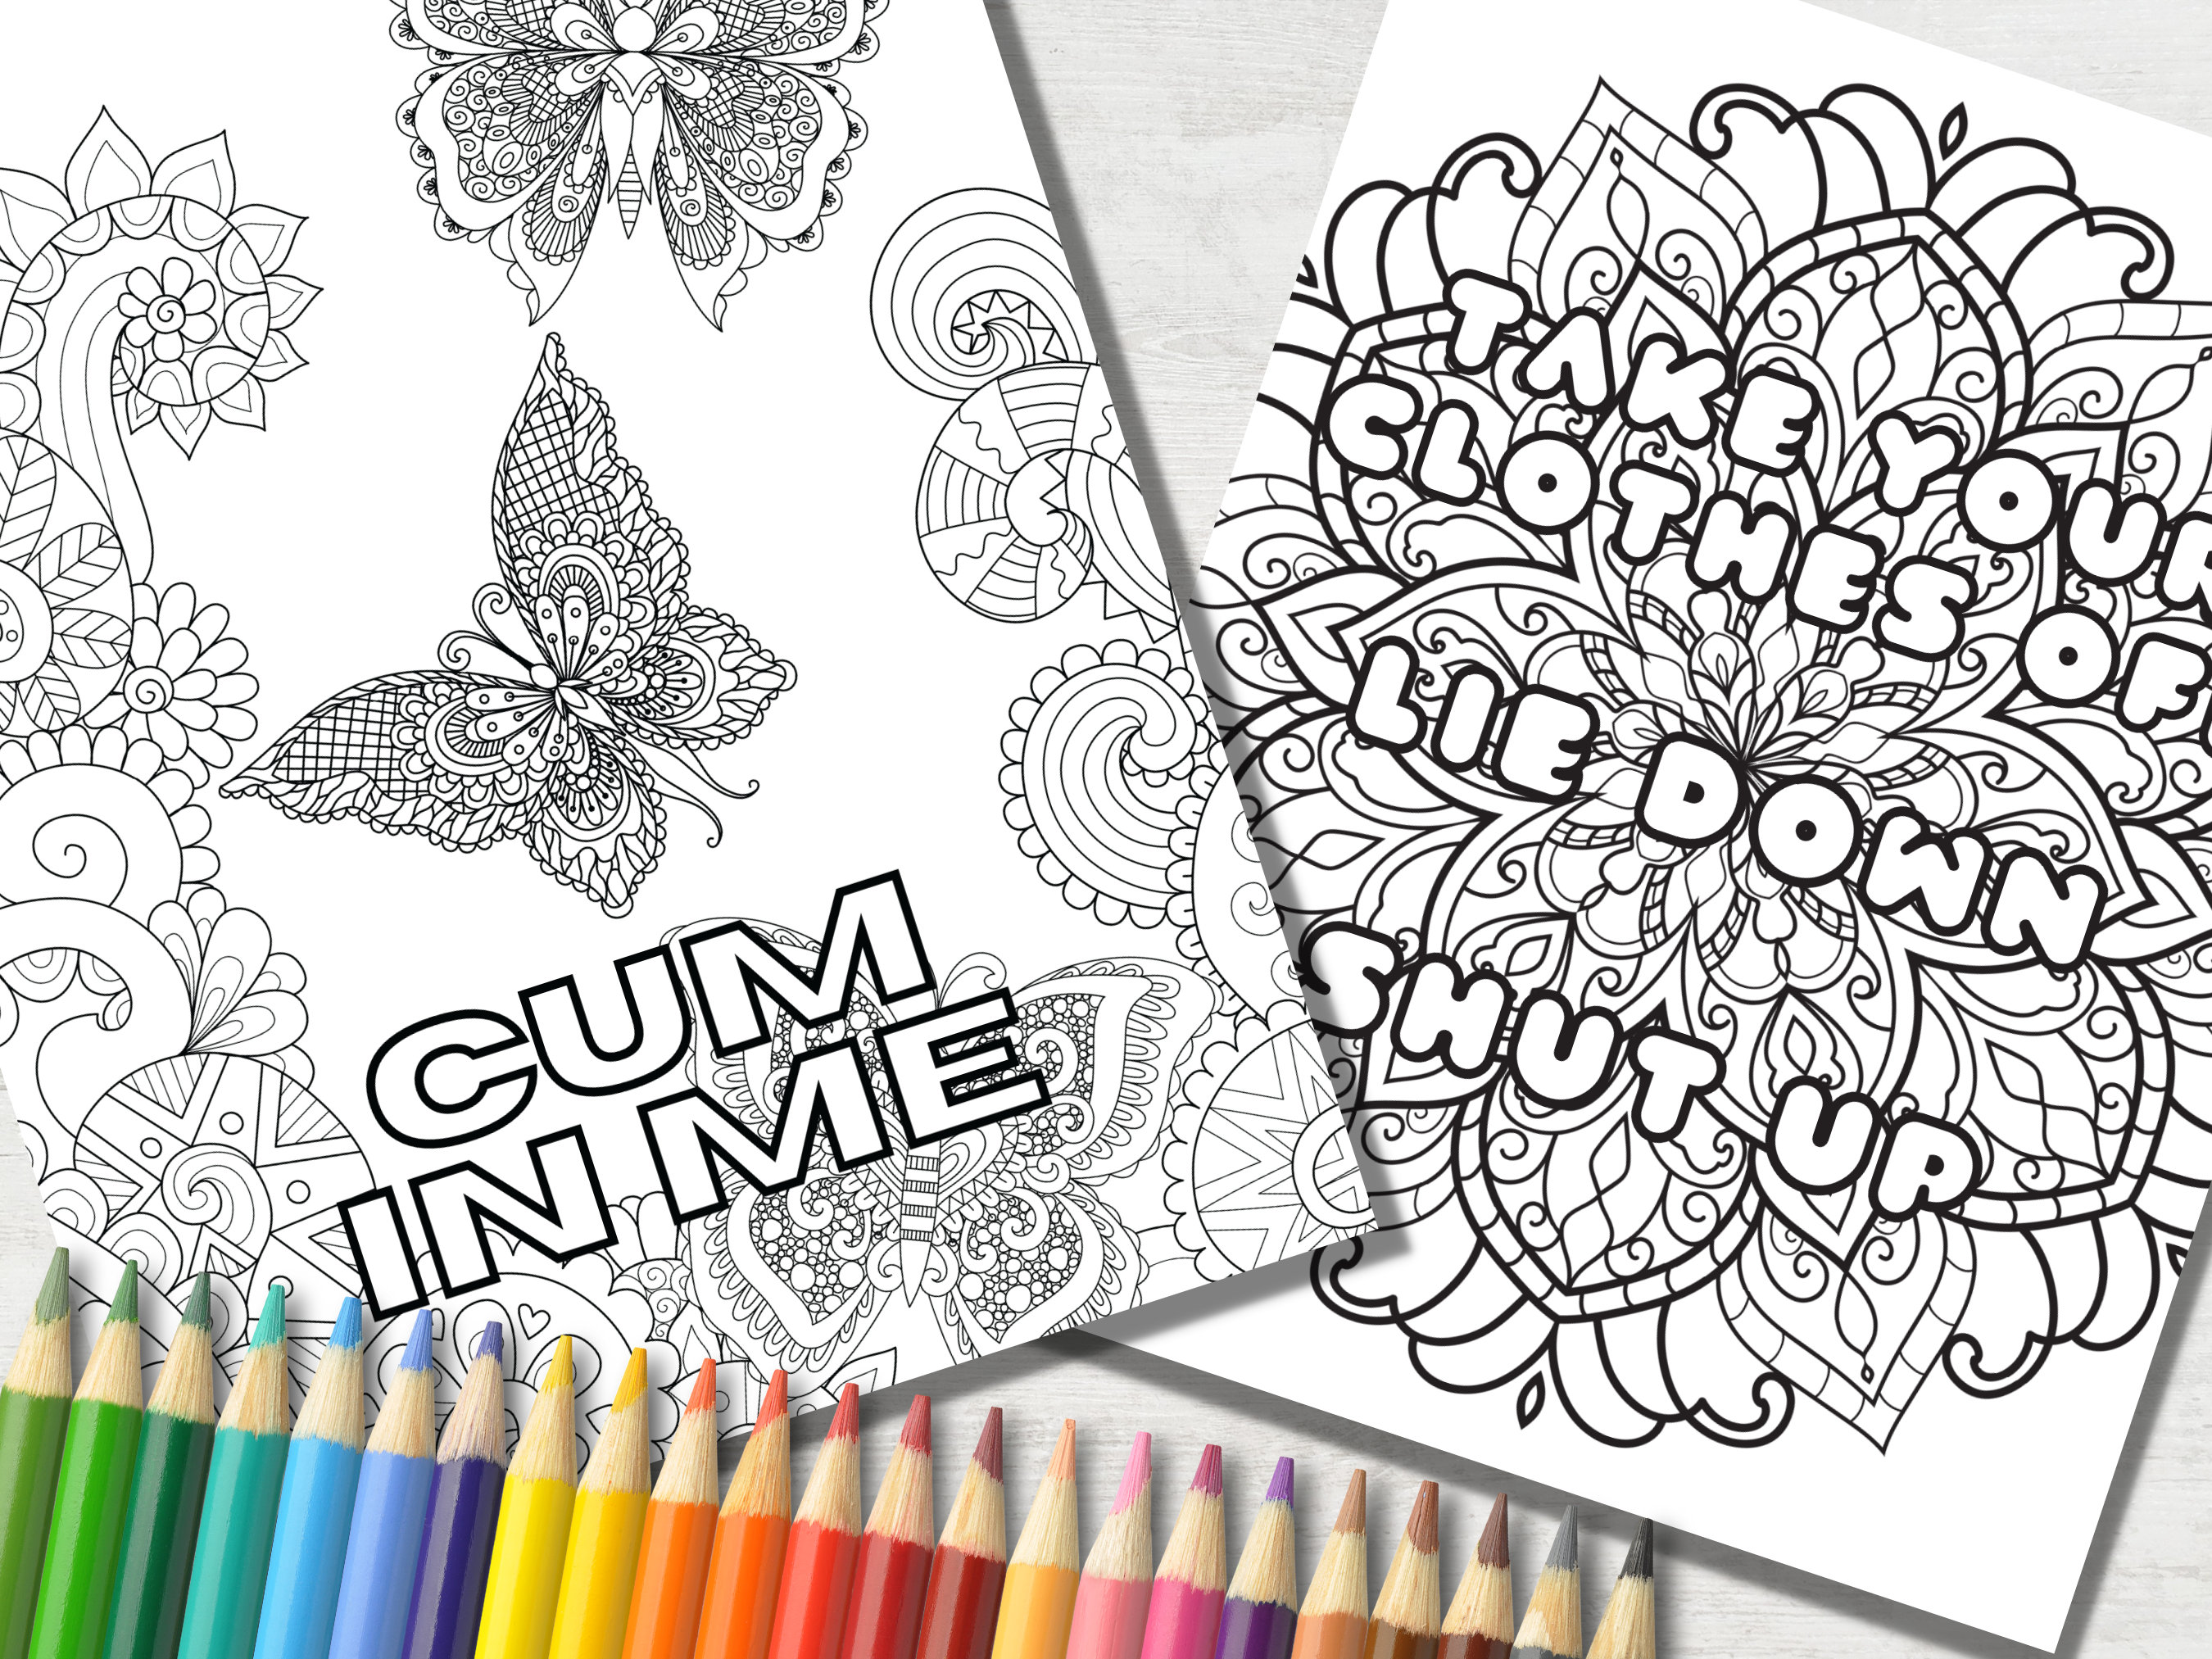 Dirty coloring pages for adults with naughty swear words and sexy phrases digital download printable adult colouring book